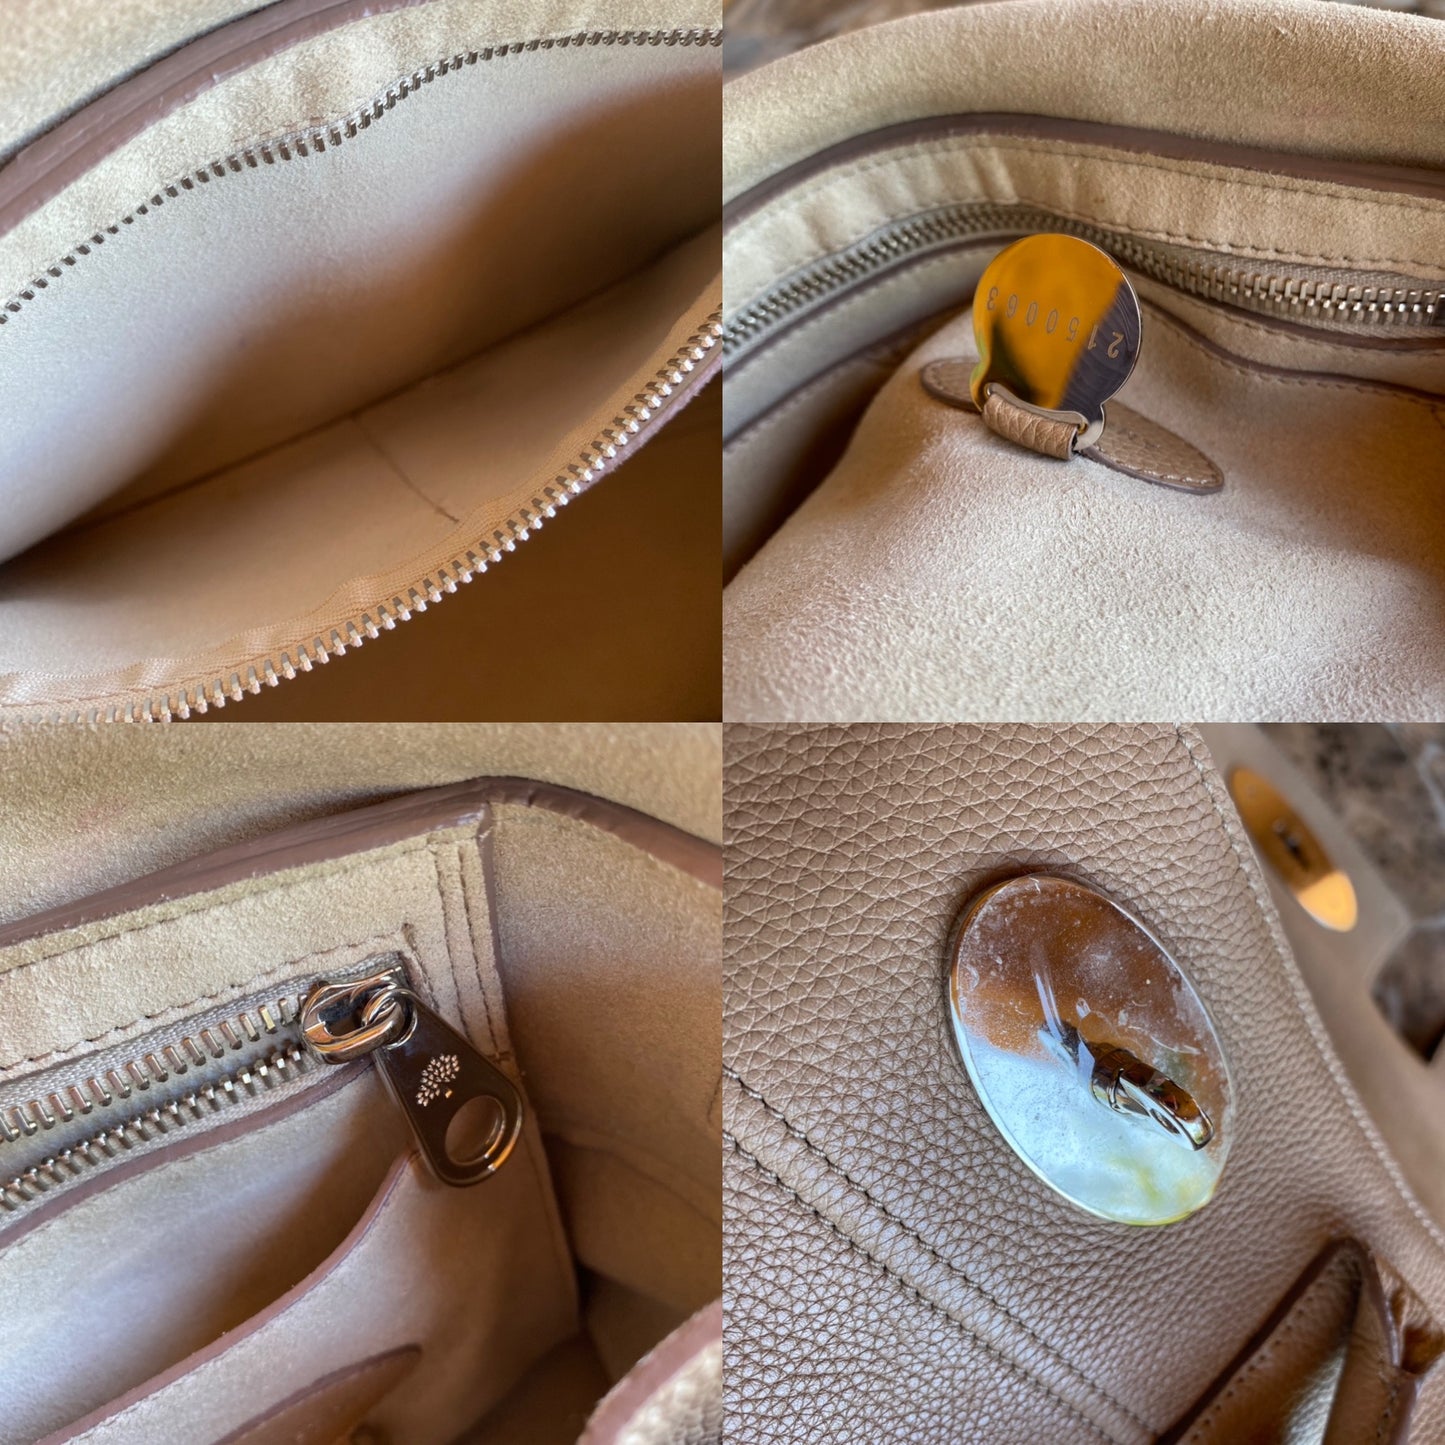 Mulberry Natural Grain Calfskin Leather Bayswater